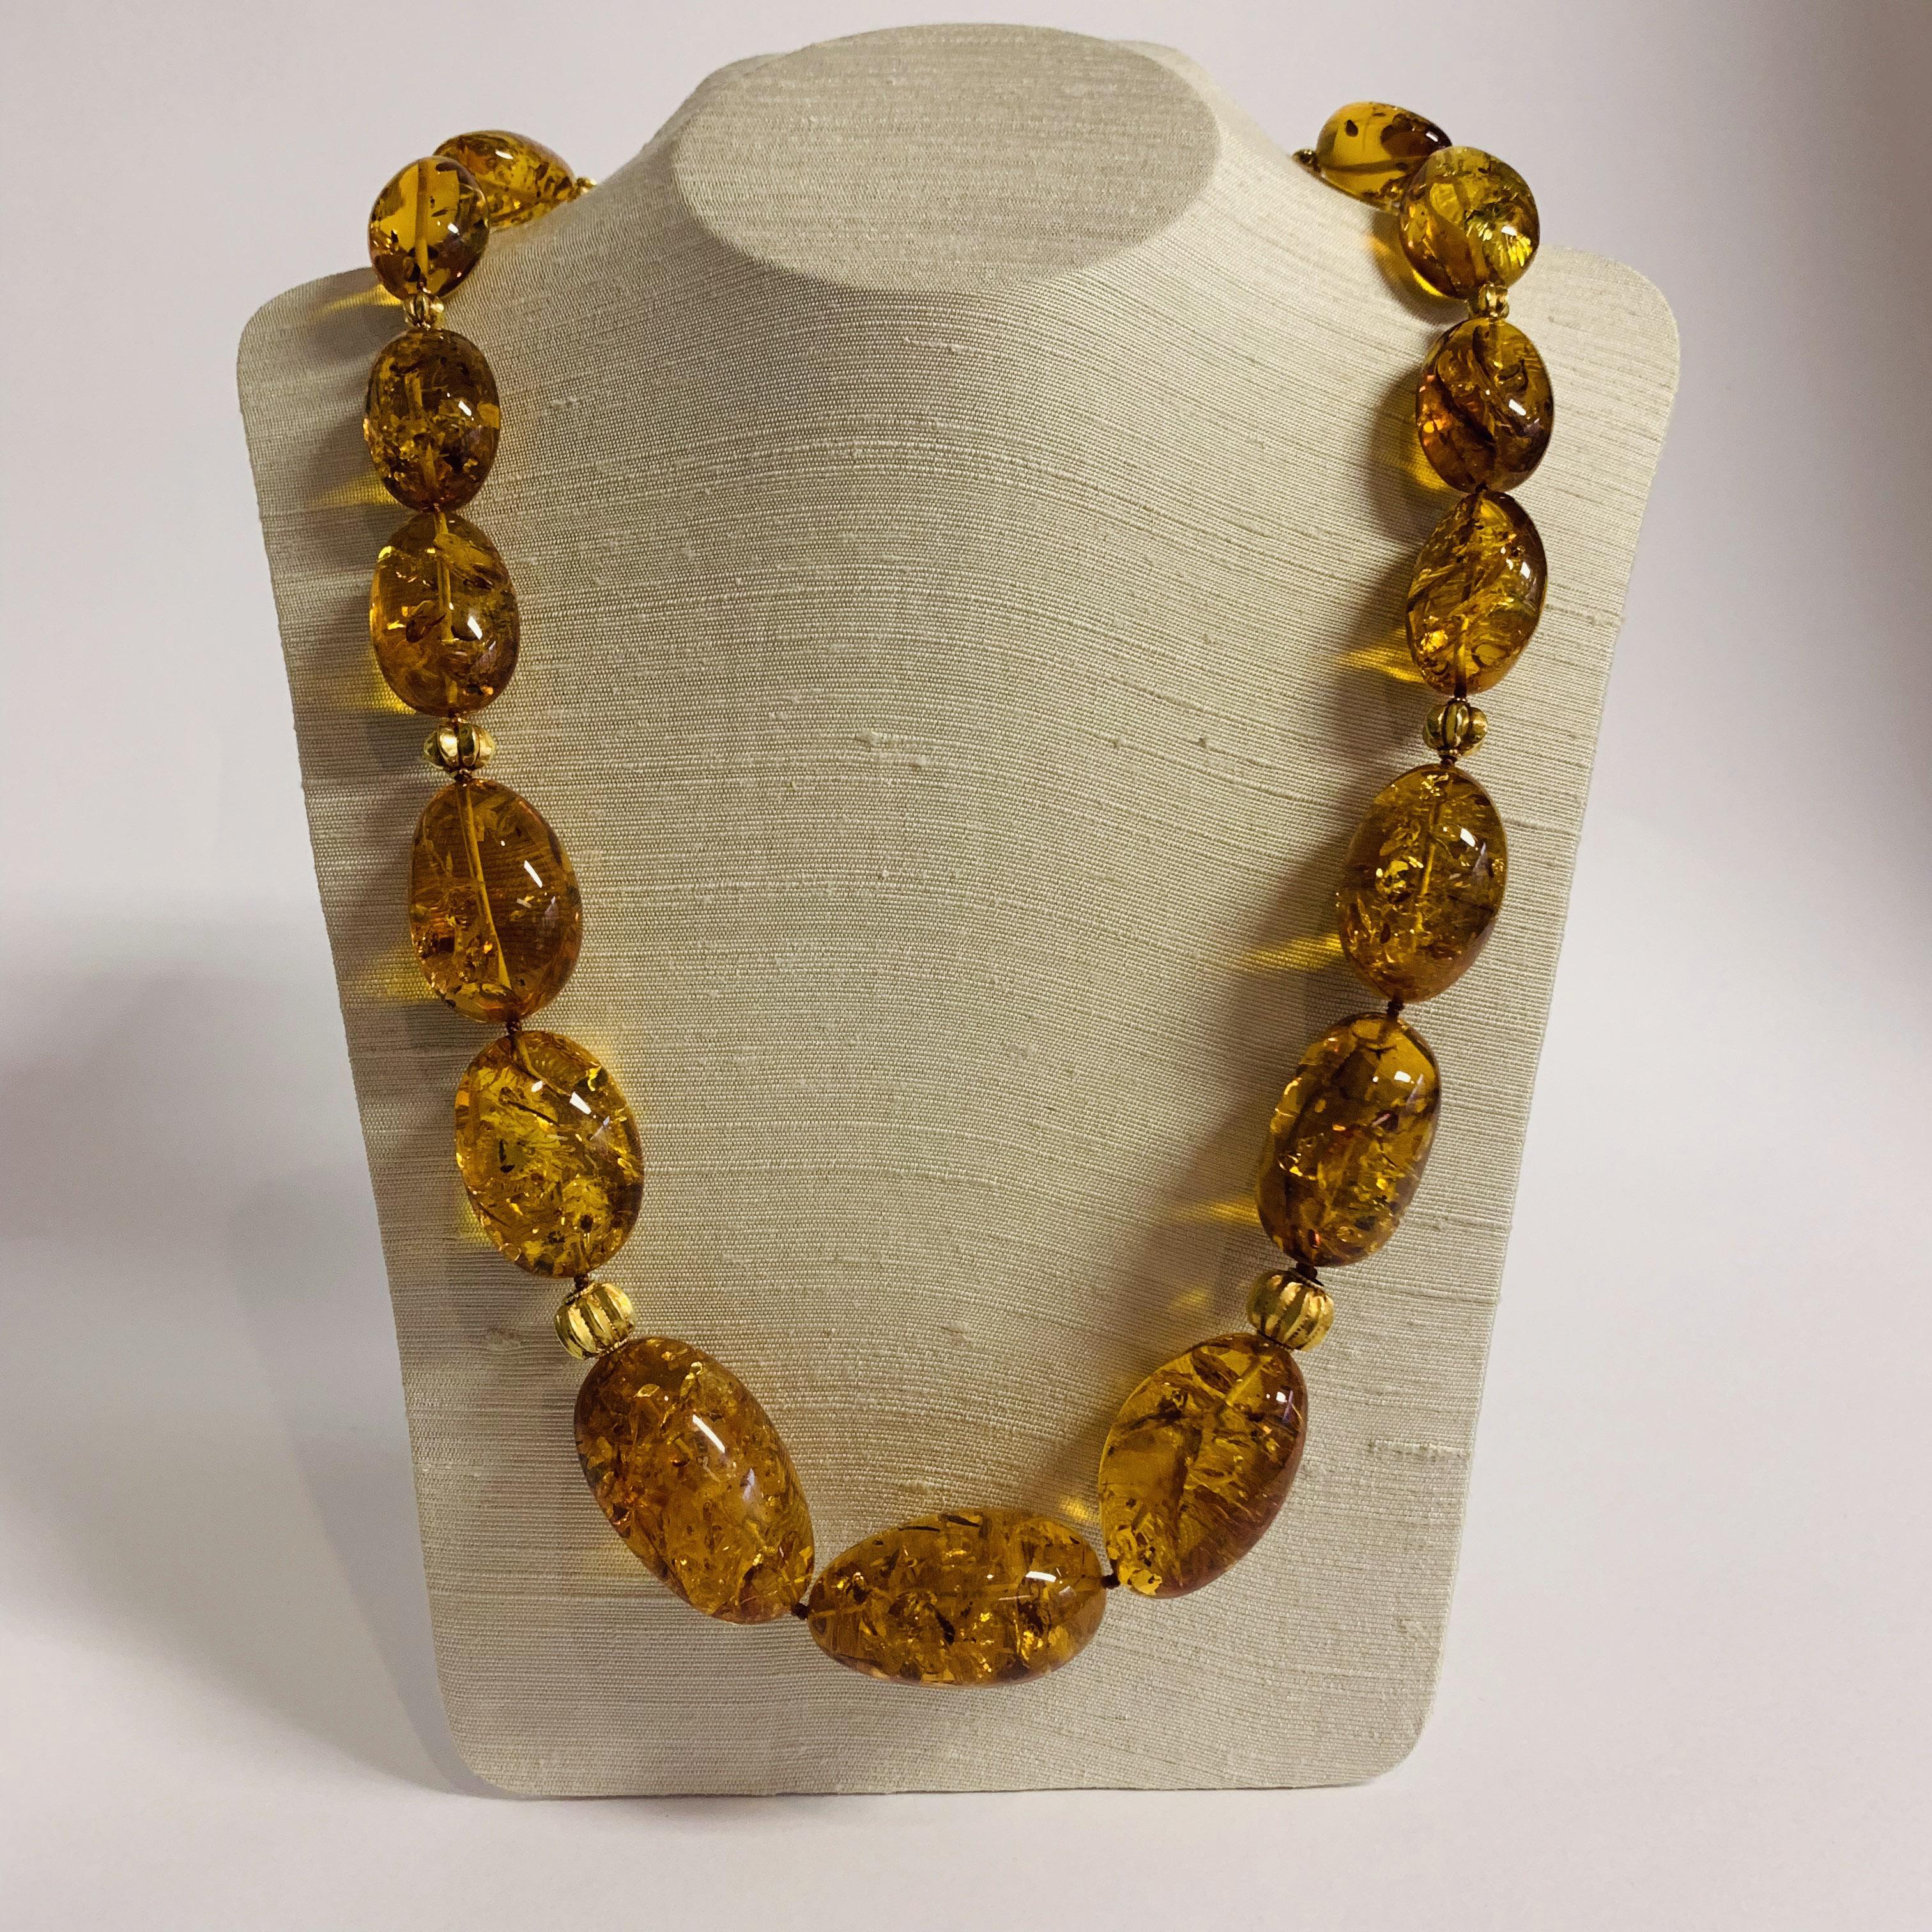 This lovely necklace of graduated deeply coloured oval Baltic Amber beads, is further accented by old 18k Gold hand-crafted ribbed Indian beads.

Designed by AMANDA CLARK for Altfield, our collection focuses on natures most lovely materials such as